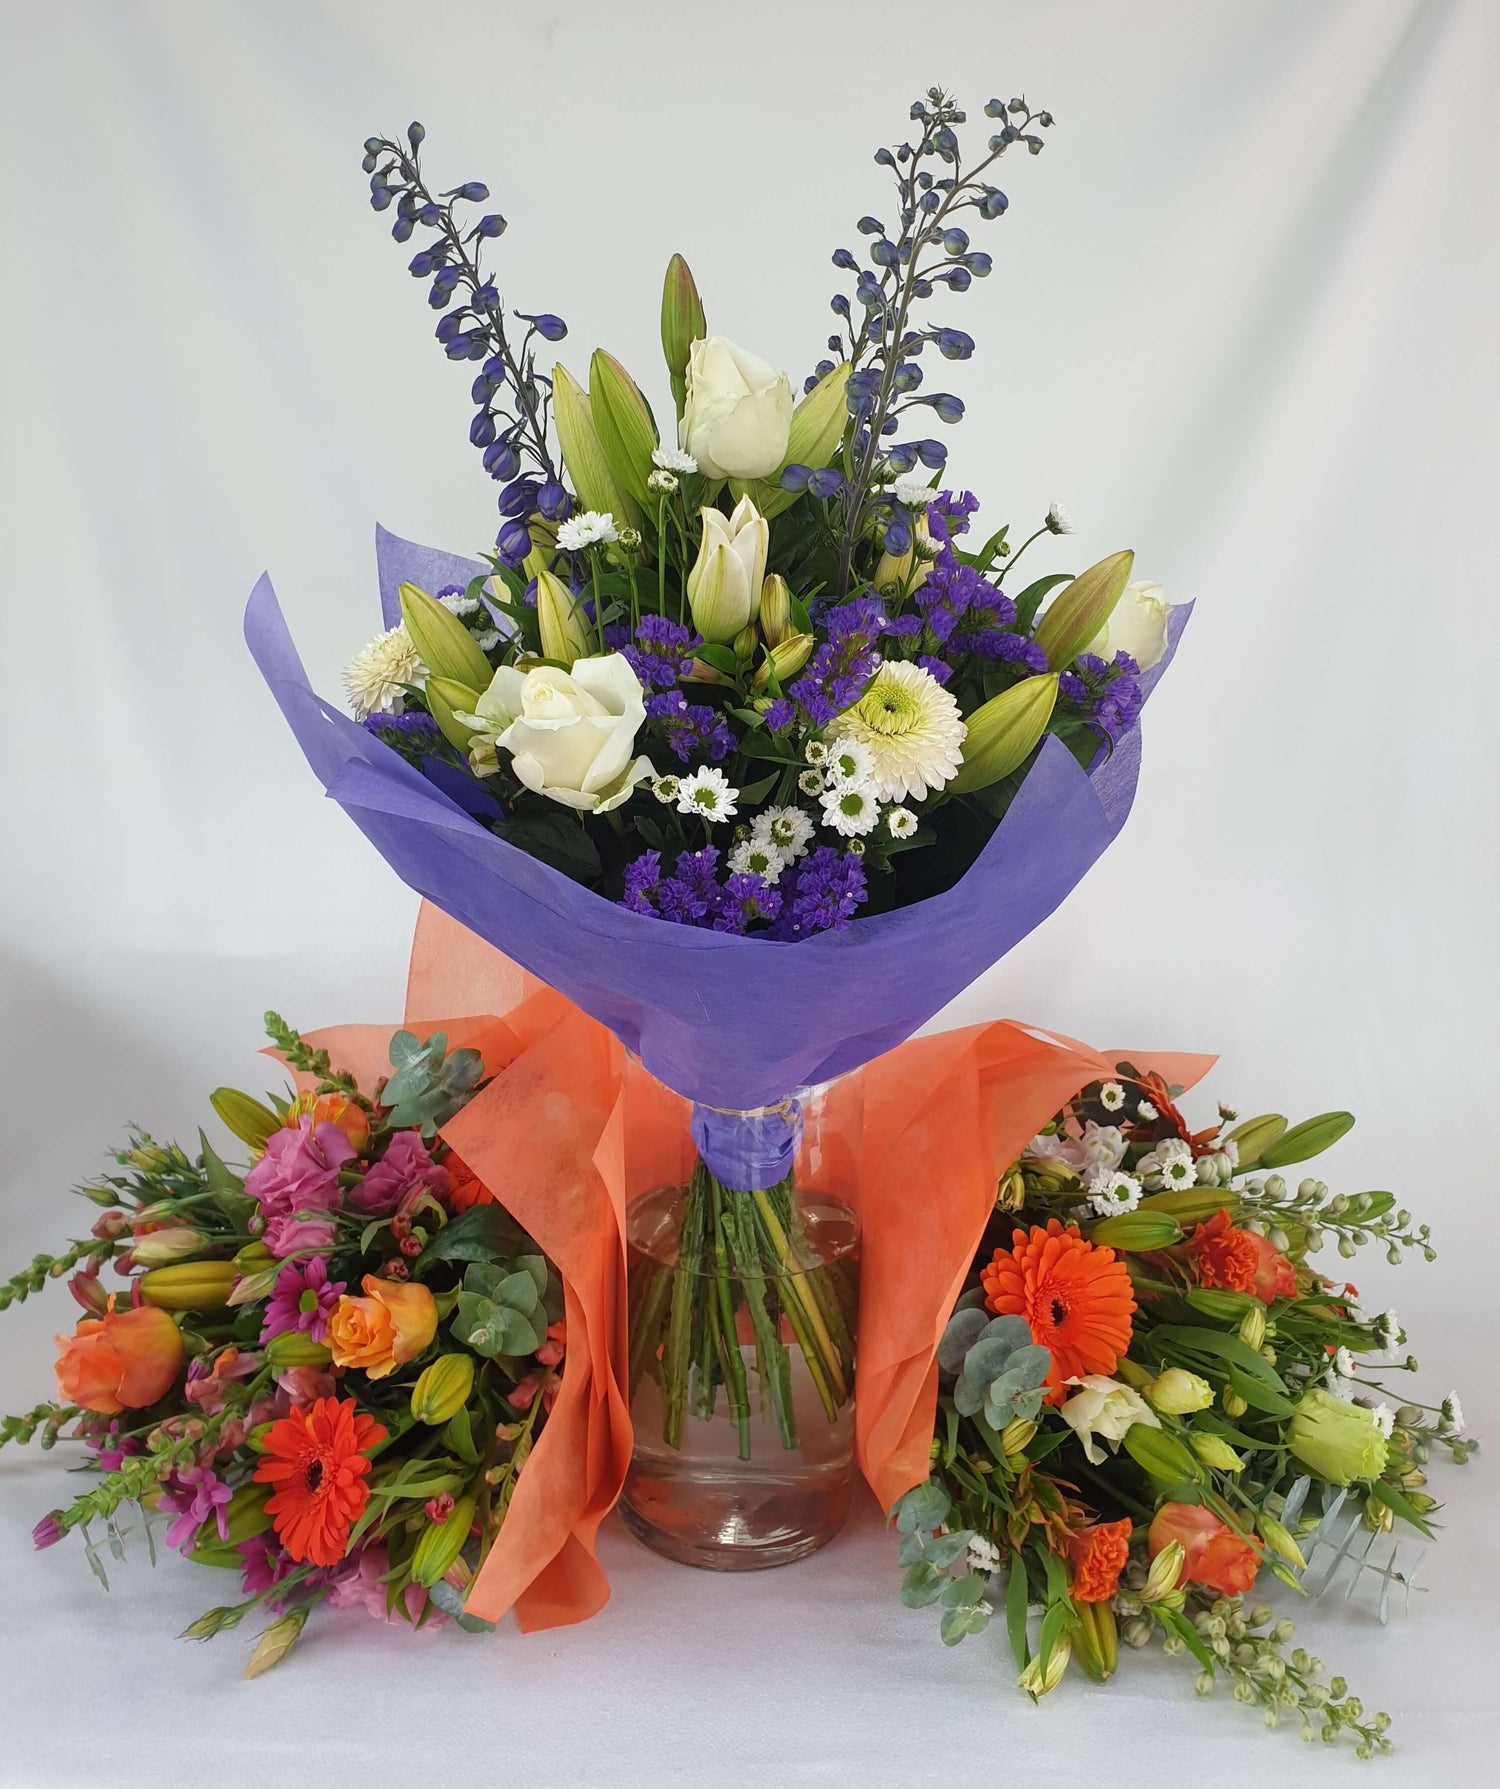 Example of the bouquets you receive if you subscribe.